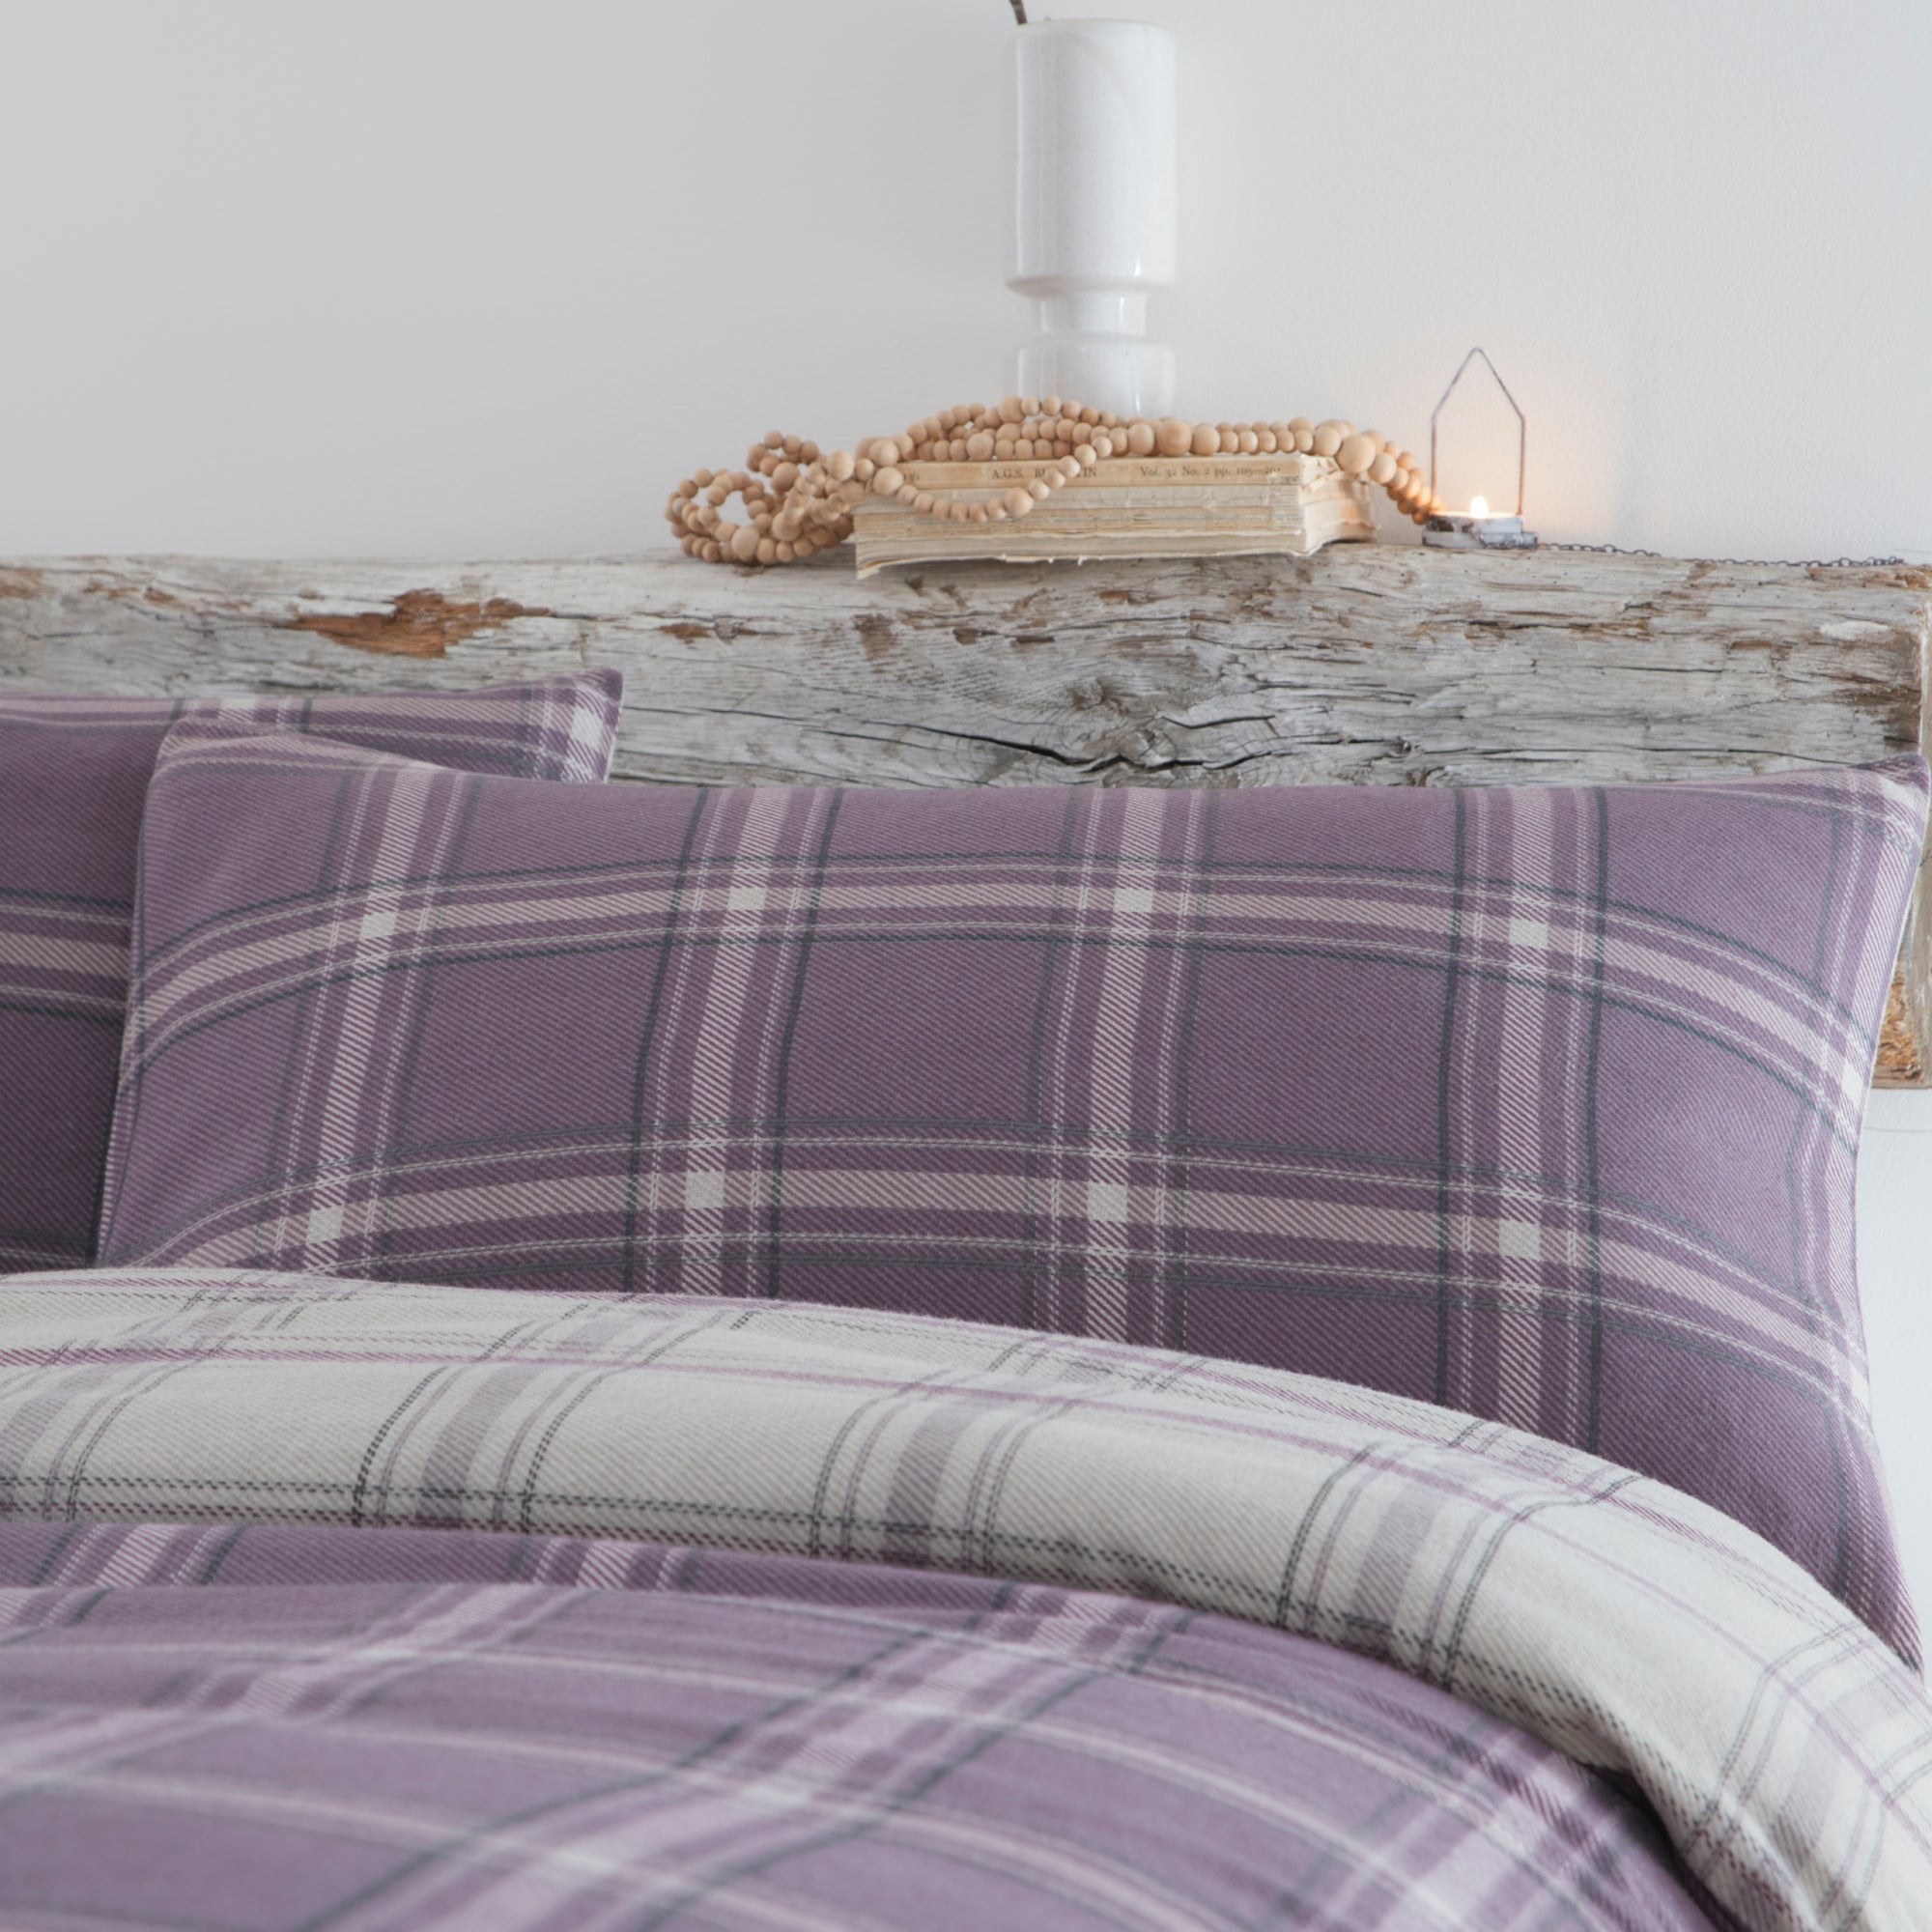 Duvet Cover Set Aviemore Check by Appletree Hygge in Heather